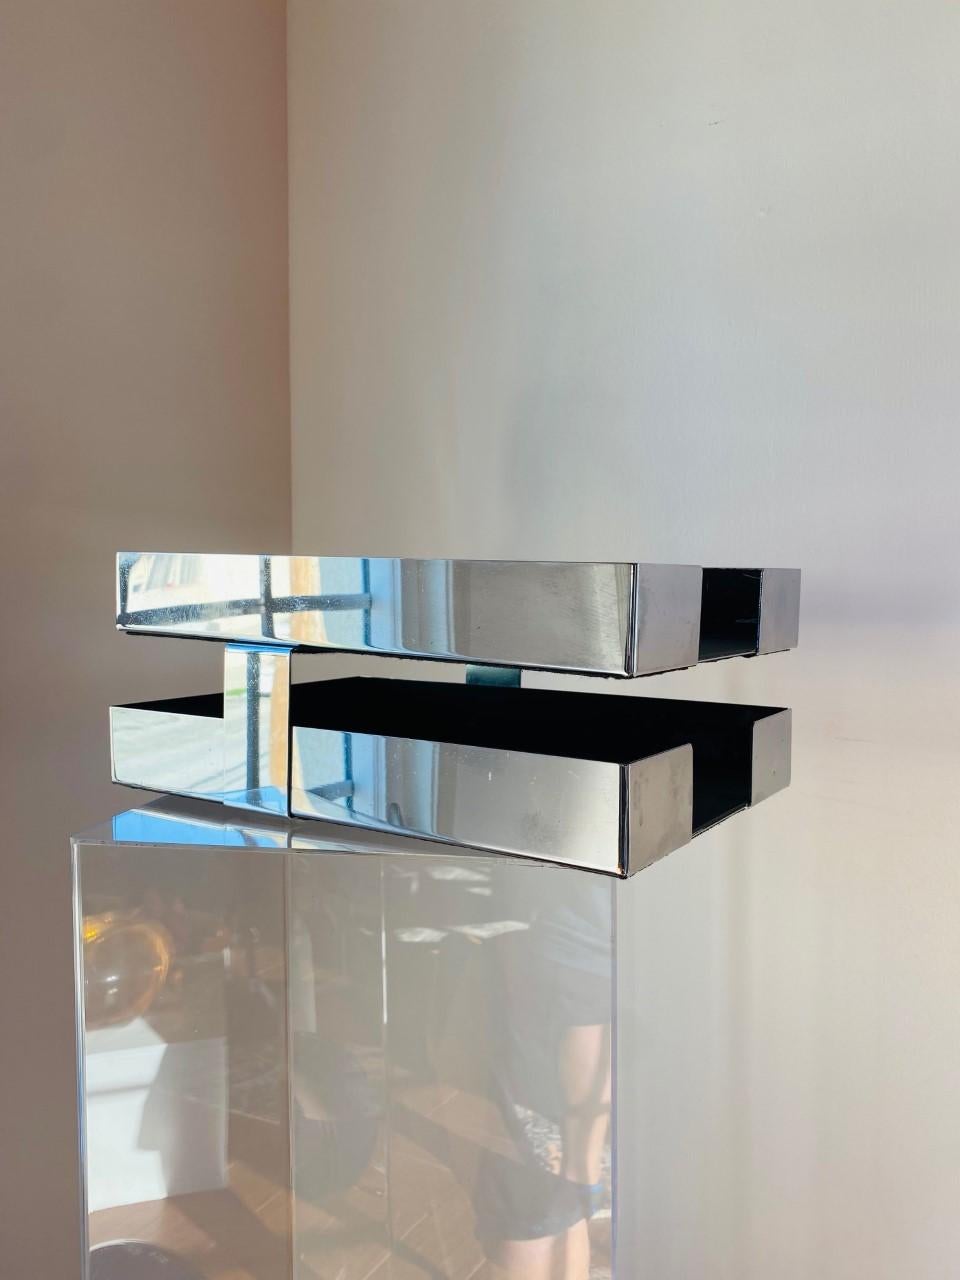 Double letter tray in polished aluminium / chrome finish with black enamel lining by Smokador. Distributed by Knoll in the 1970s. Clean and minimalist design that is timeless and classic. 

Midcentury, Hollywood Regency, eclectic, coastal, modern,